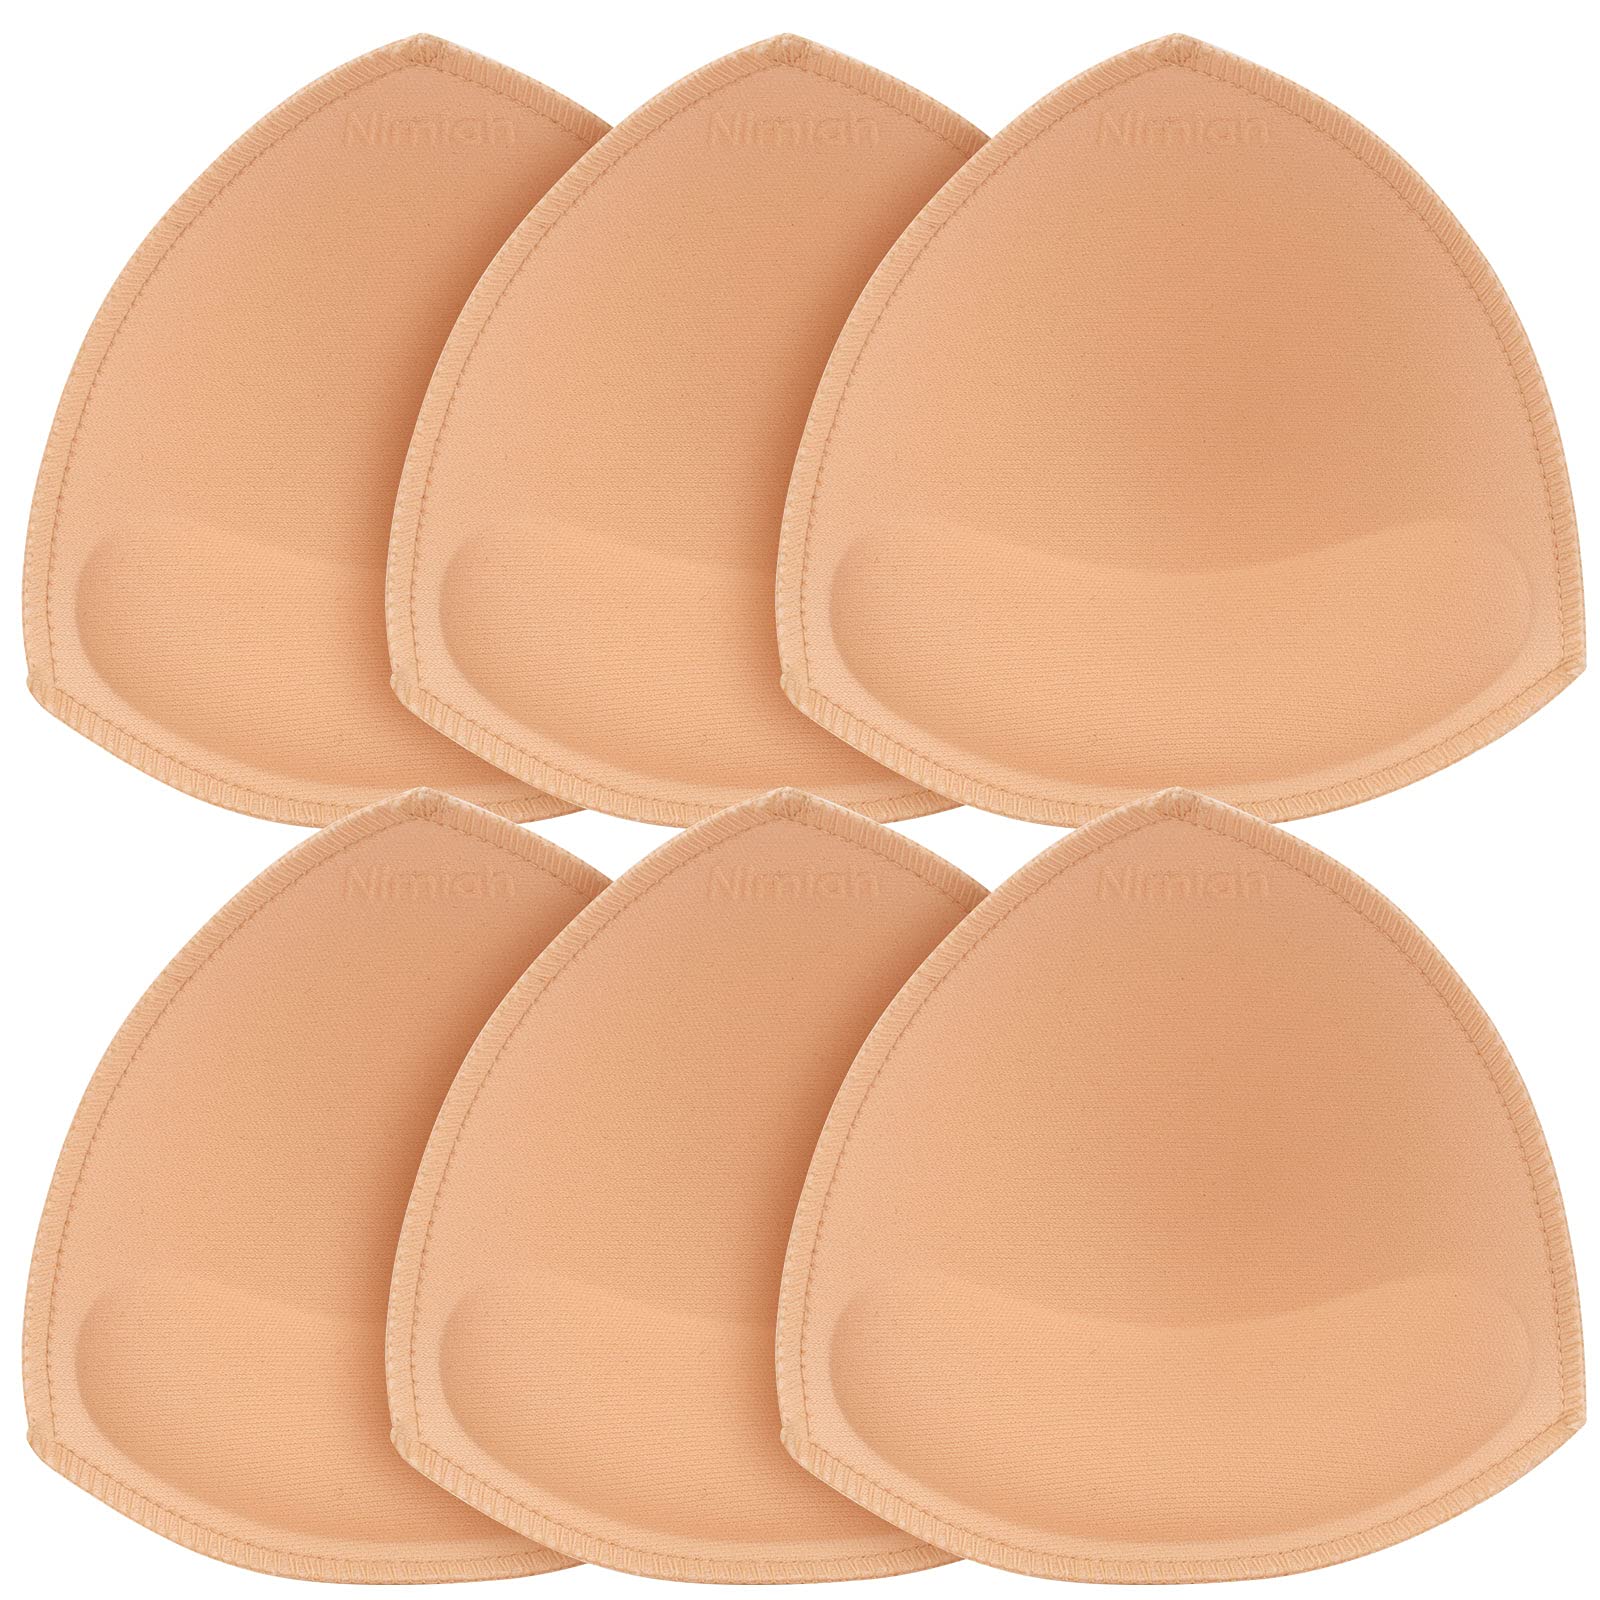 Buy LUB Women's Bra Insert Pads Enhance Breast Cup Size White Black Beige  Wire Free Cotton padded Seamless Cups (3 SET) at